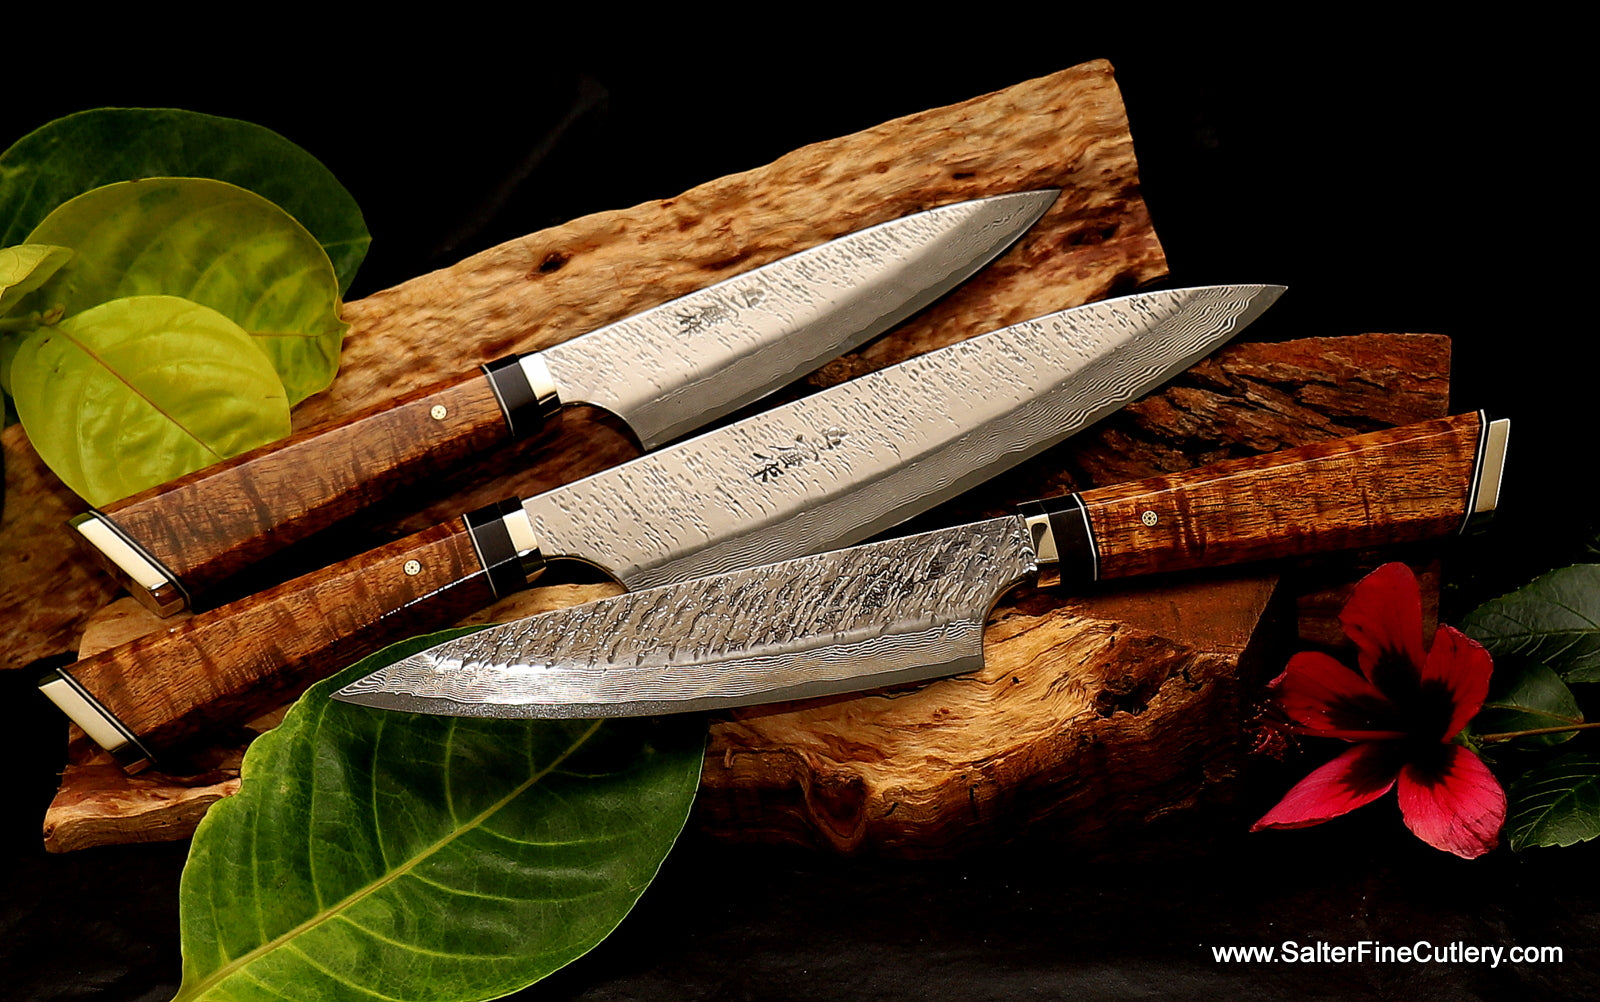 Raptor design chef knives featuring our hidden tang handles from Salter Fine Cutlery of Hawaii